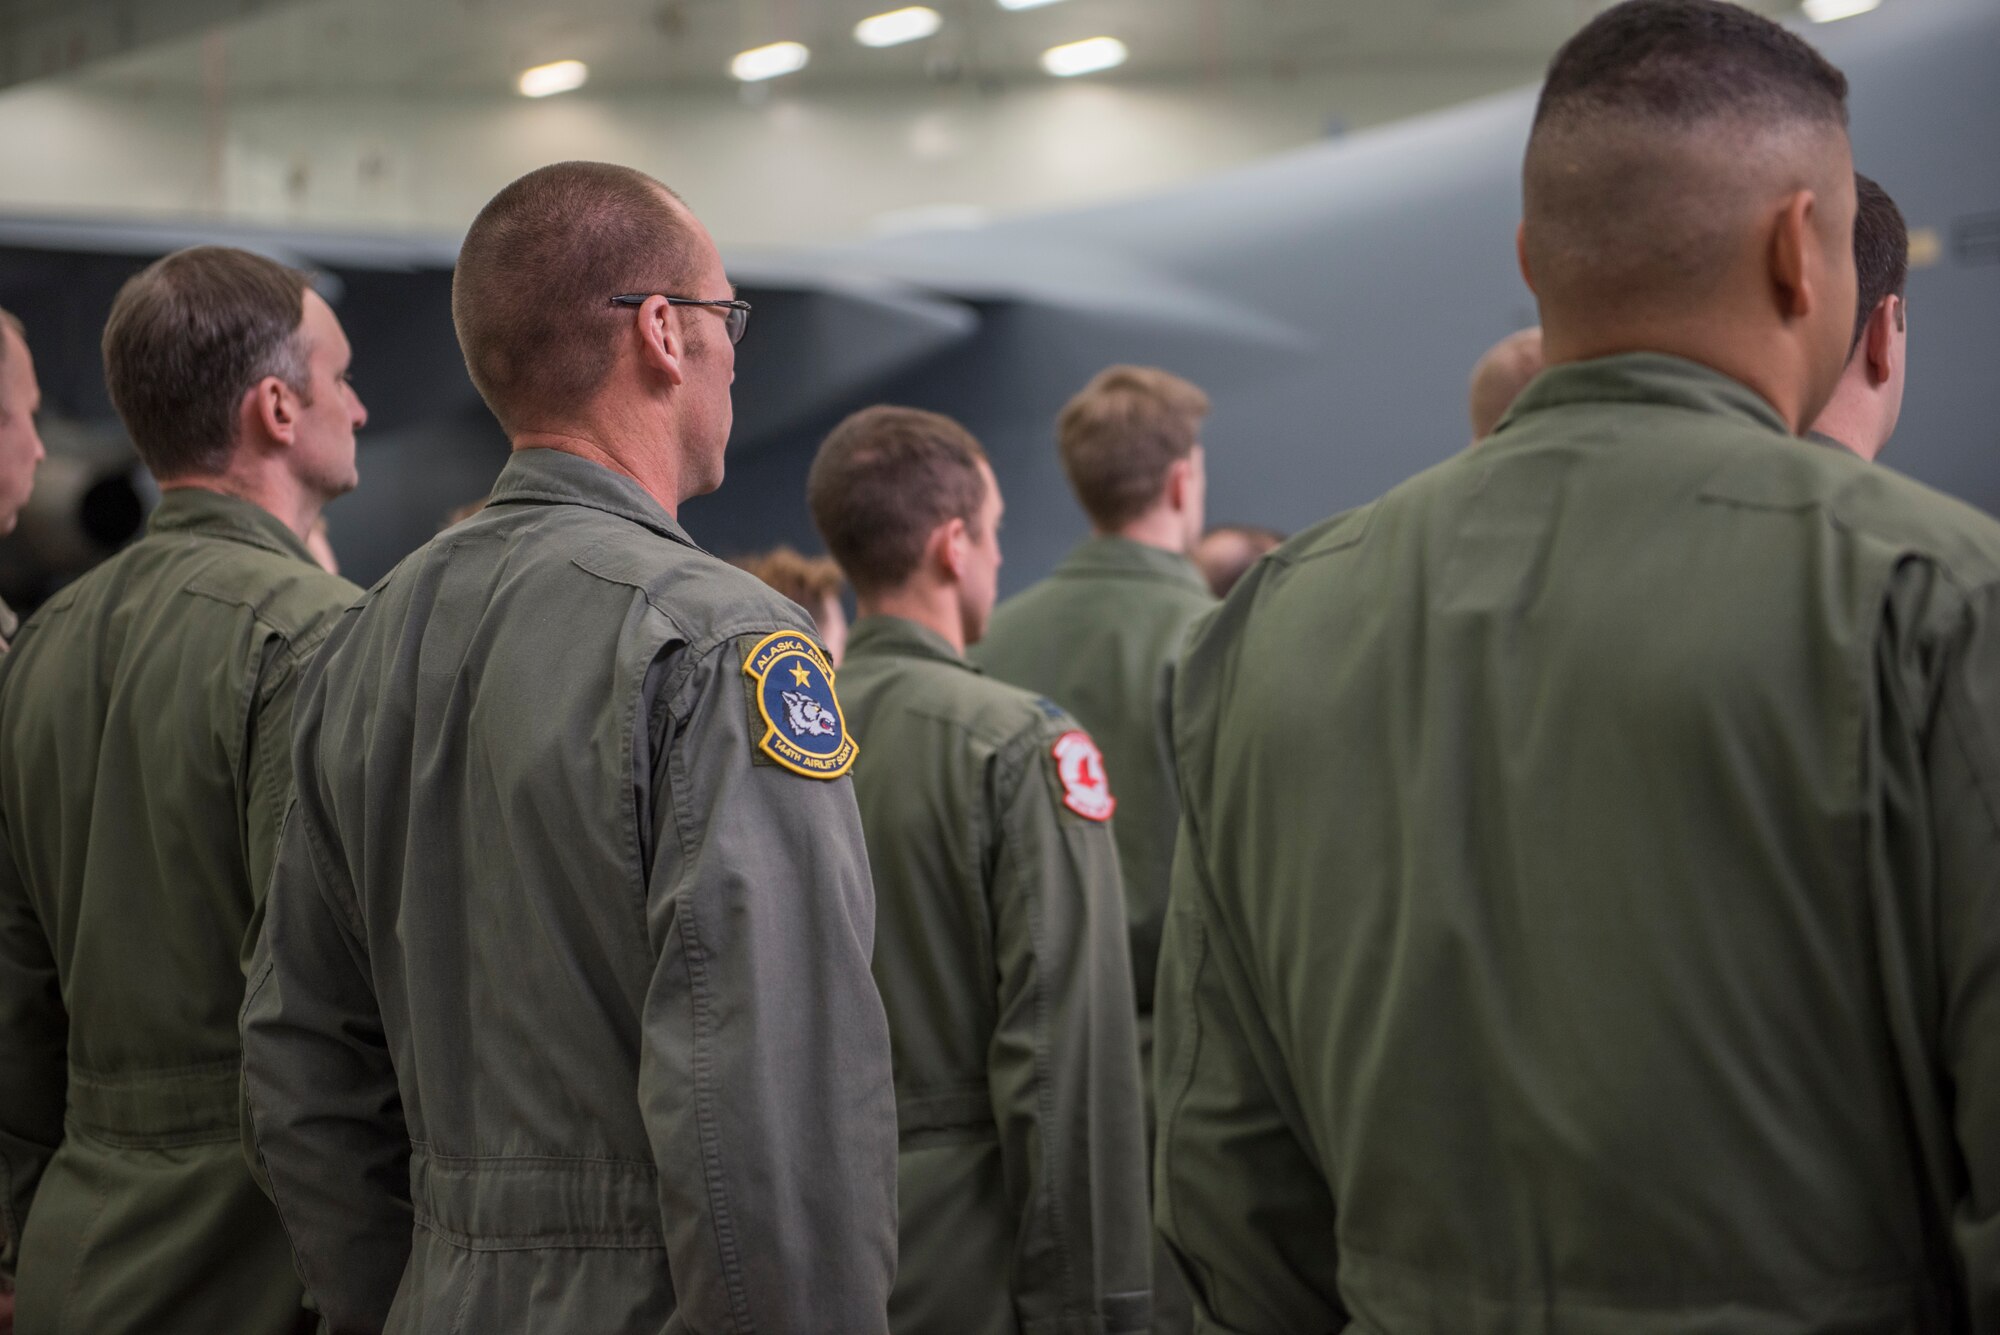 Members of the Alaska Air National Guard’s 176th Wing and the Regular Air Force’s 3rd Wing witnessed the unveiling of a new tail flash on the C-17 Globemaster IIIs assigned to the 176th Wing’s 144th Airlift Squadron at Joint Base Elmendorf-Richardson, Alaska, Oct. 1, 2018. The new tail flash depicts a wolf head, (the 144th AS’s emblem), on one side, and a firebird (the 517th AS’s emblem), of equal size on the other. (U.S. Air National Guard photo by Tech. Sgt. N. Alicia Halla)